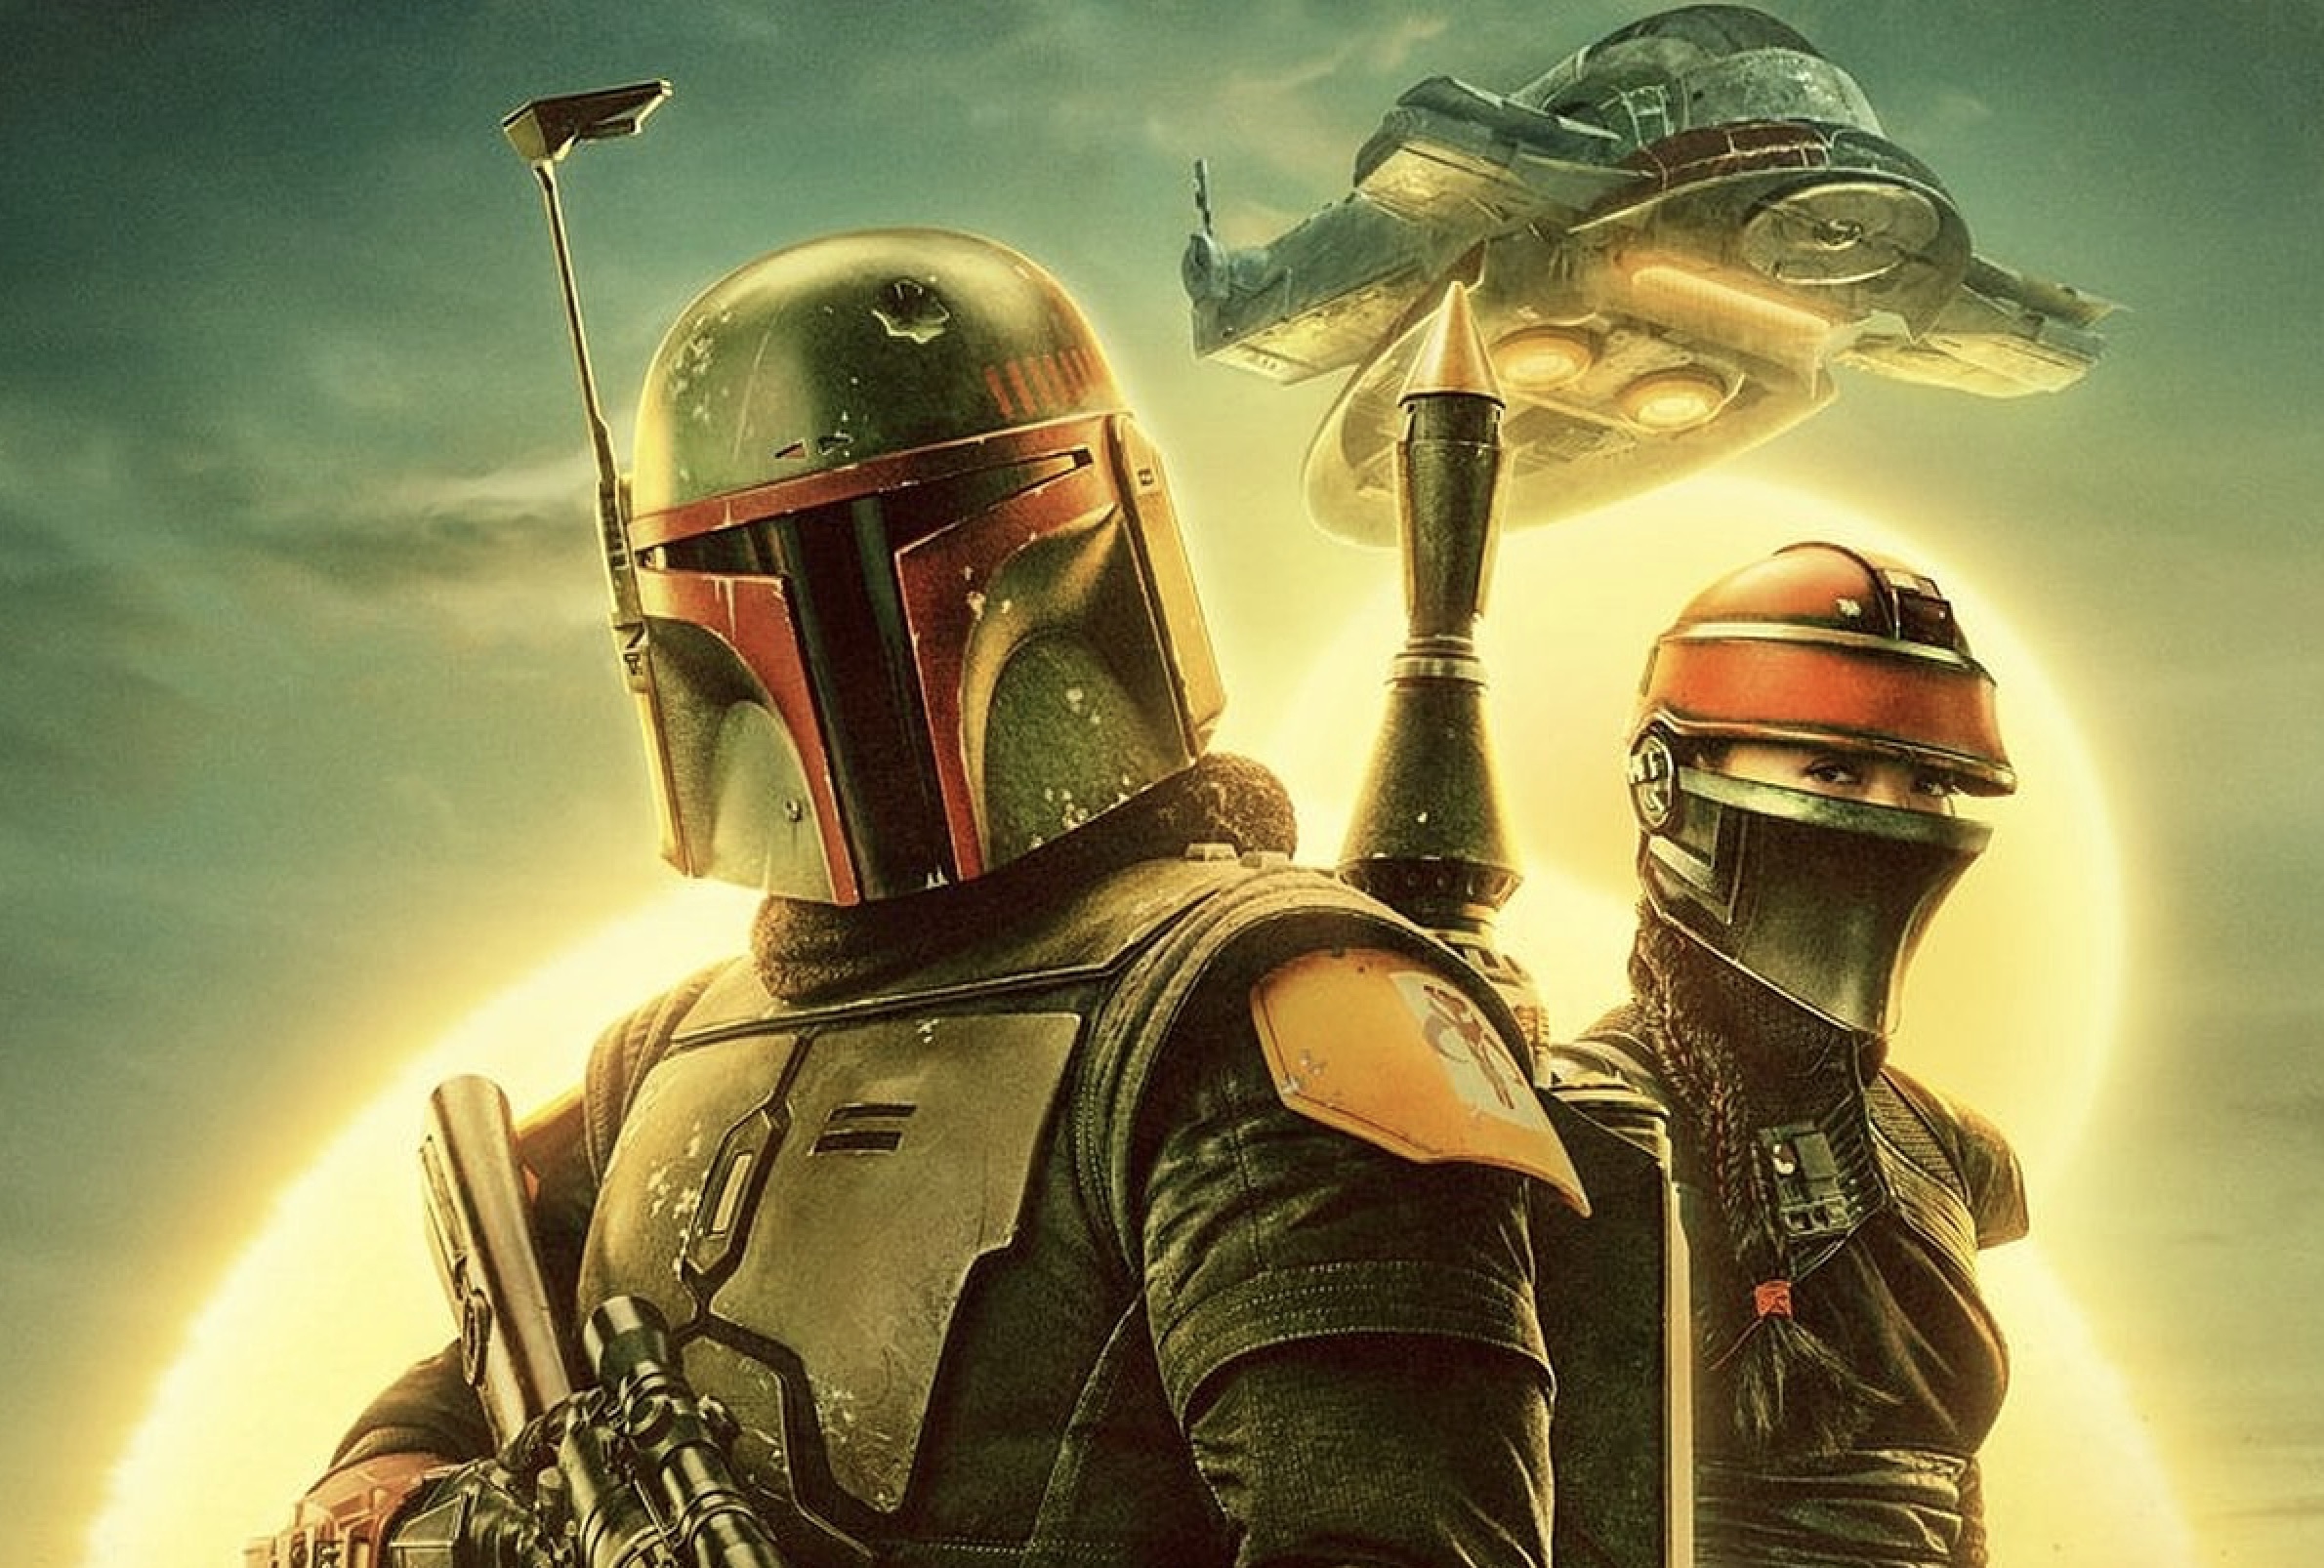 The Book of Boba Fett Cast - Every Performer and Character in the Disney+ Series